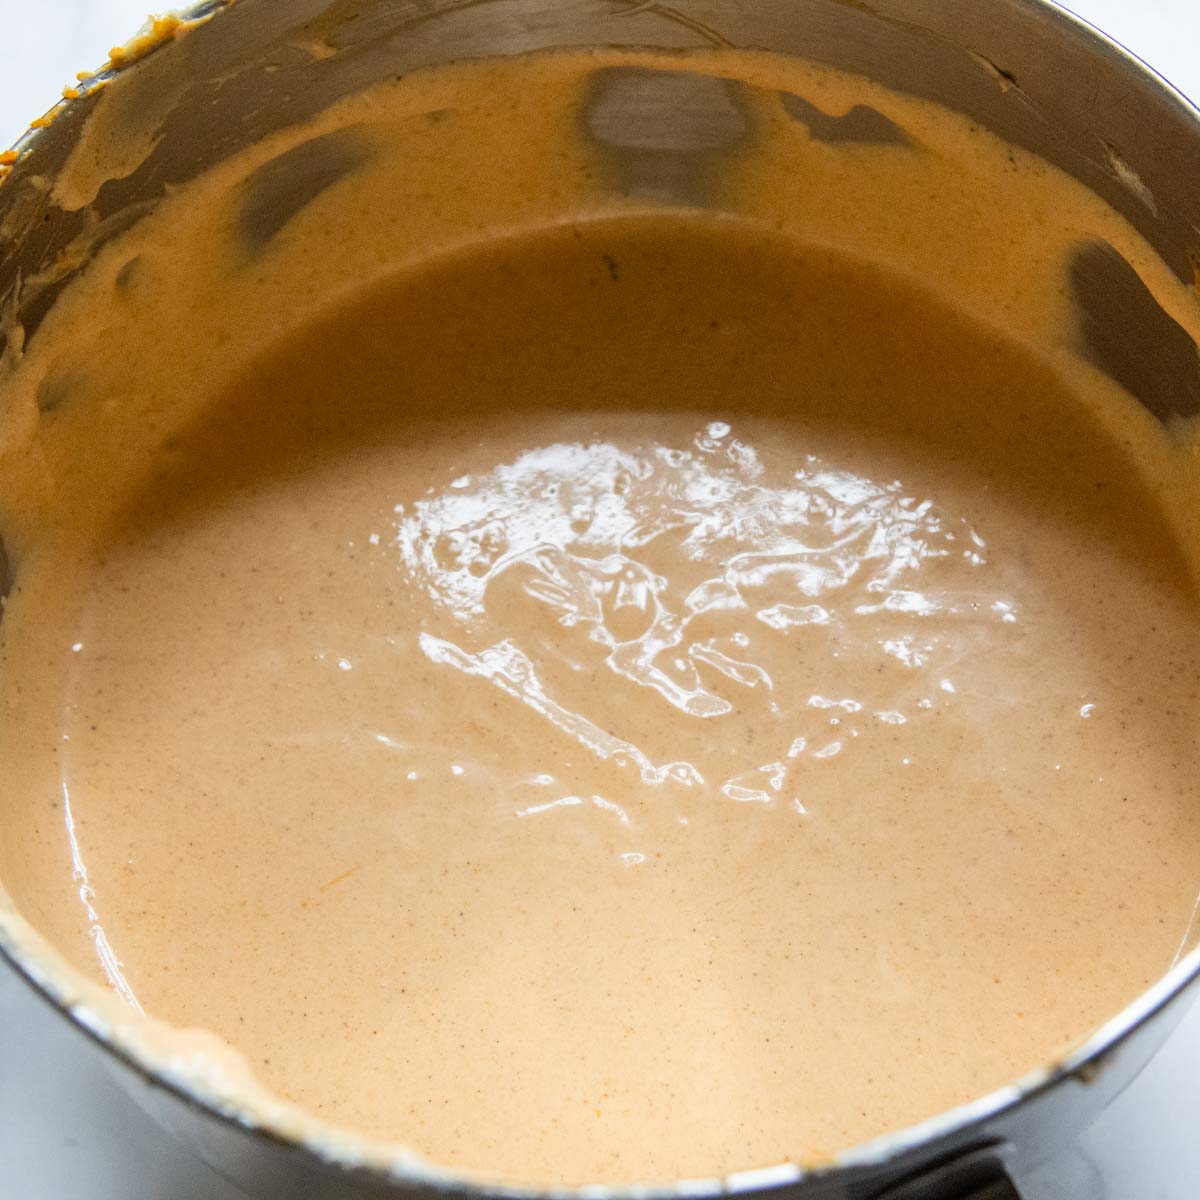 the cheesecake batter in a bowl after mixing.